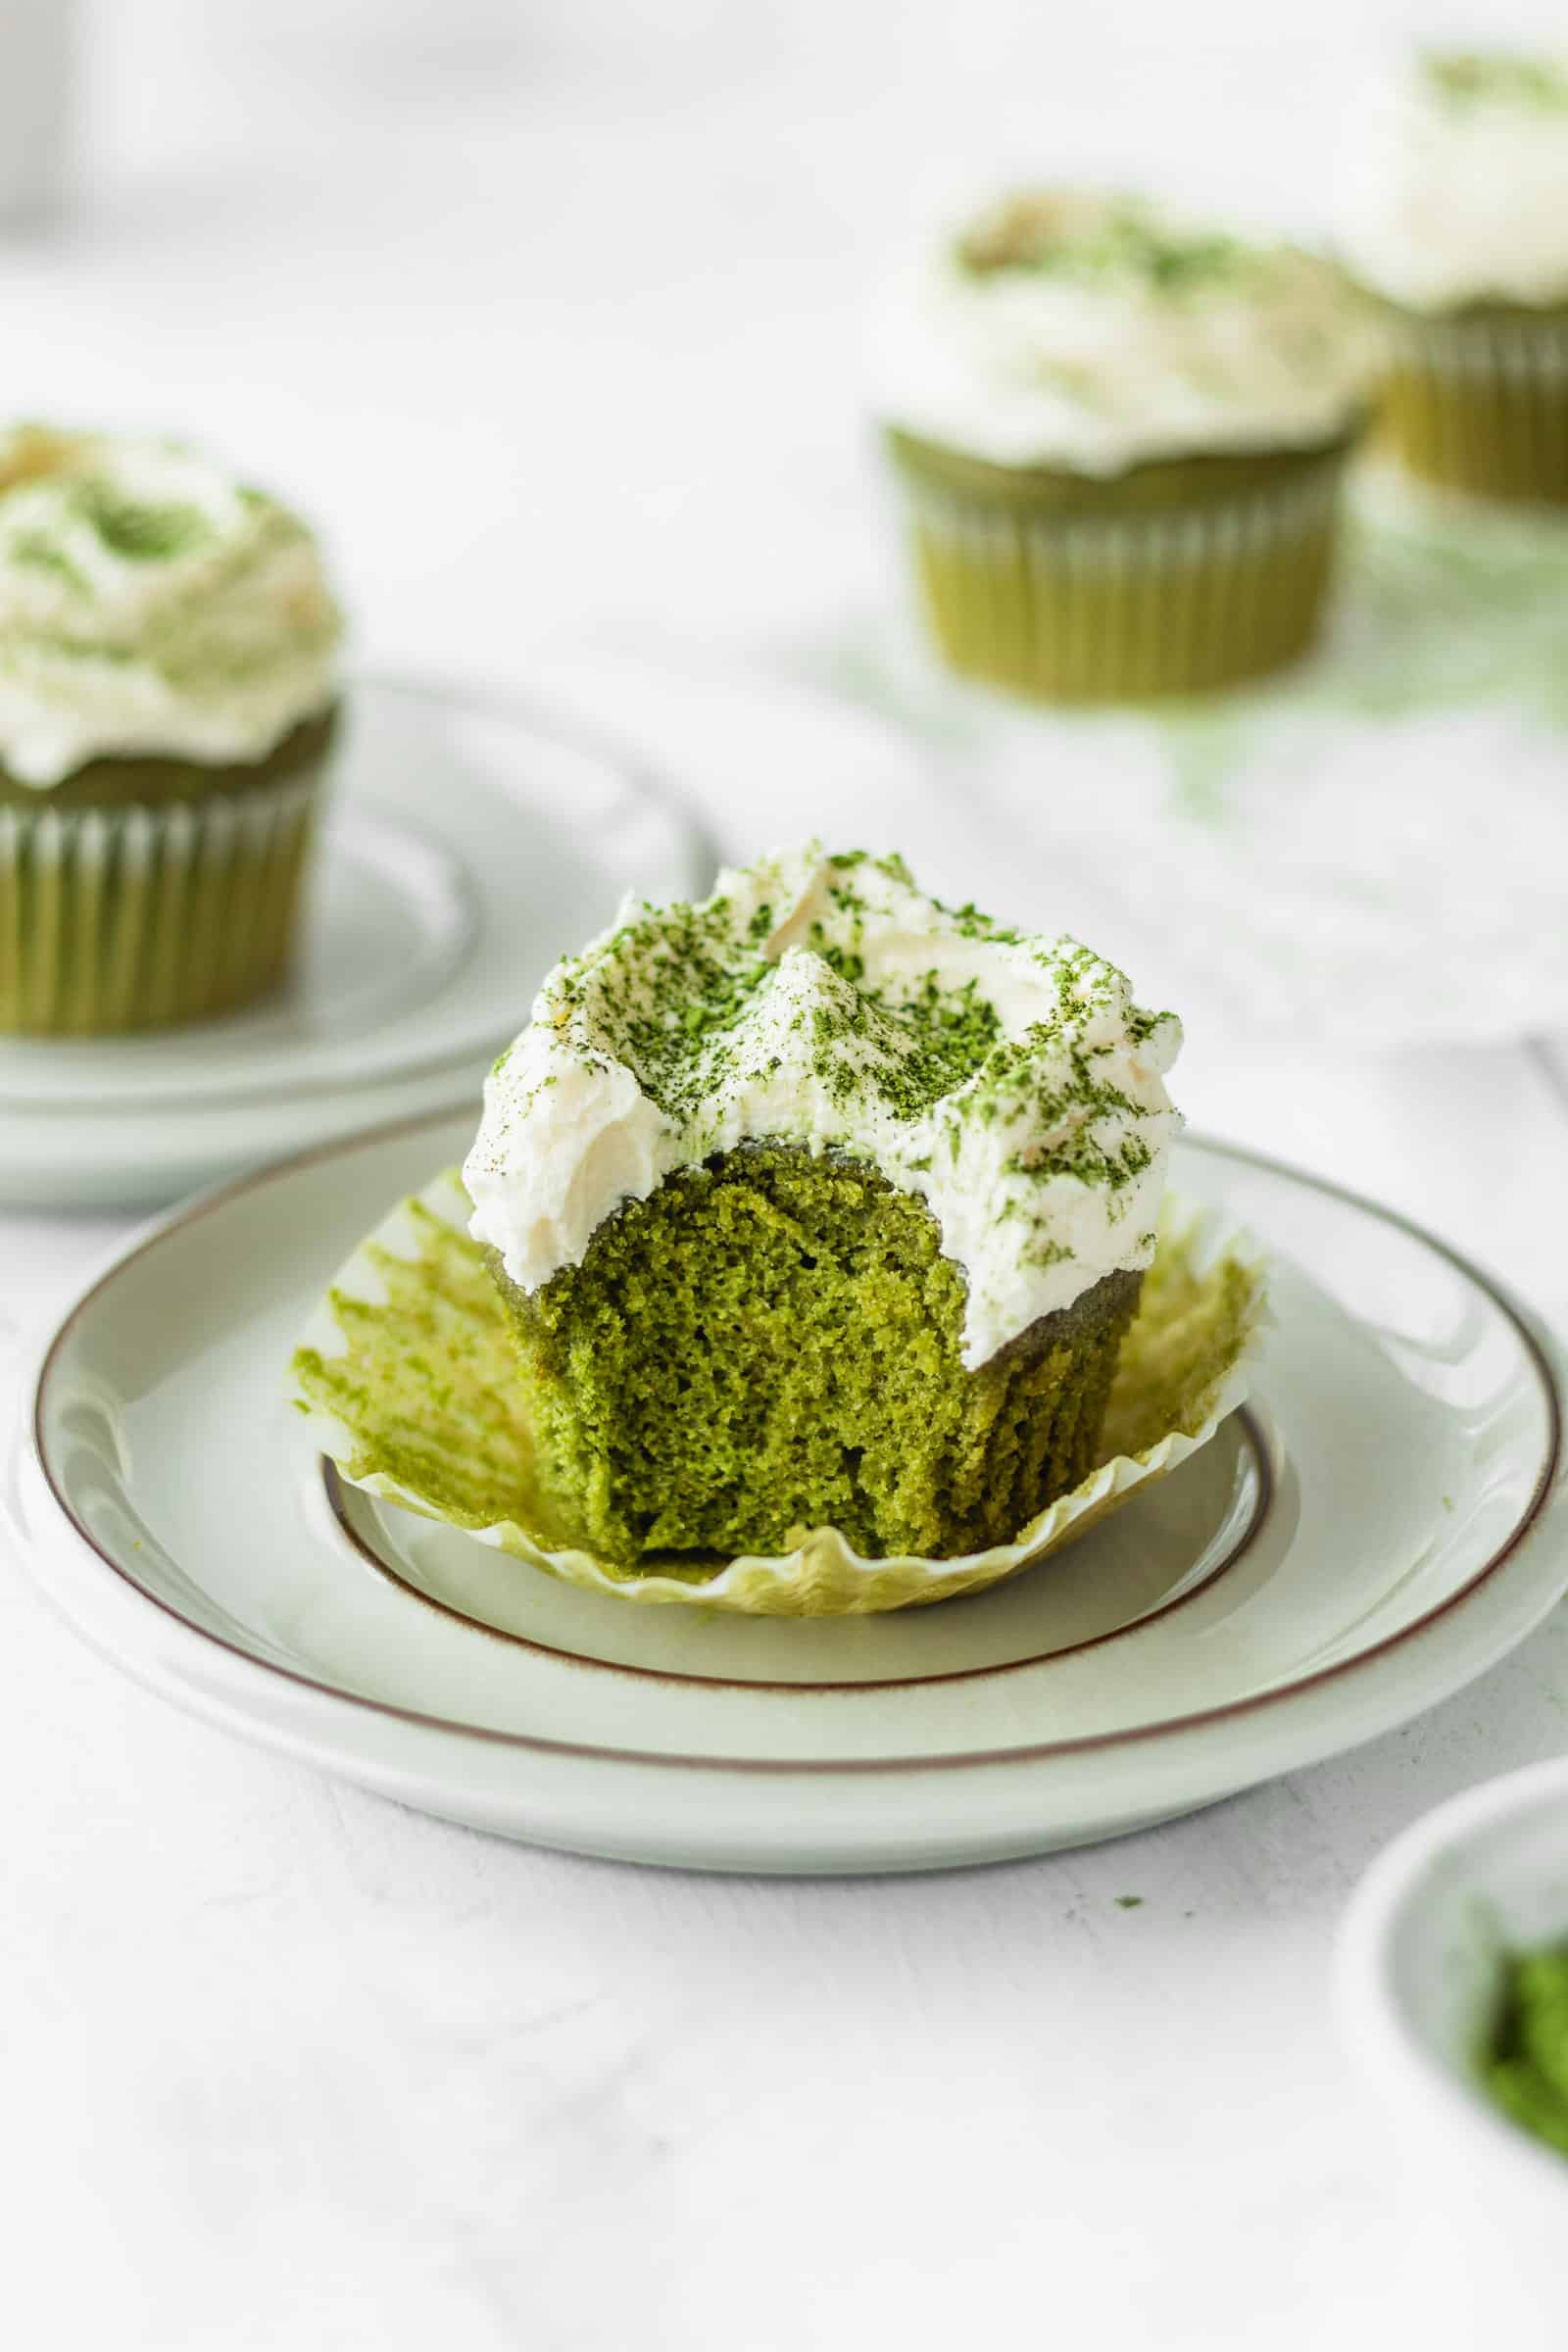 Fluffy green tea cupcake with a bite taken out